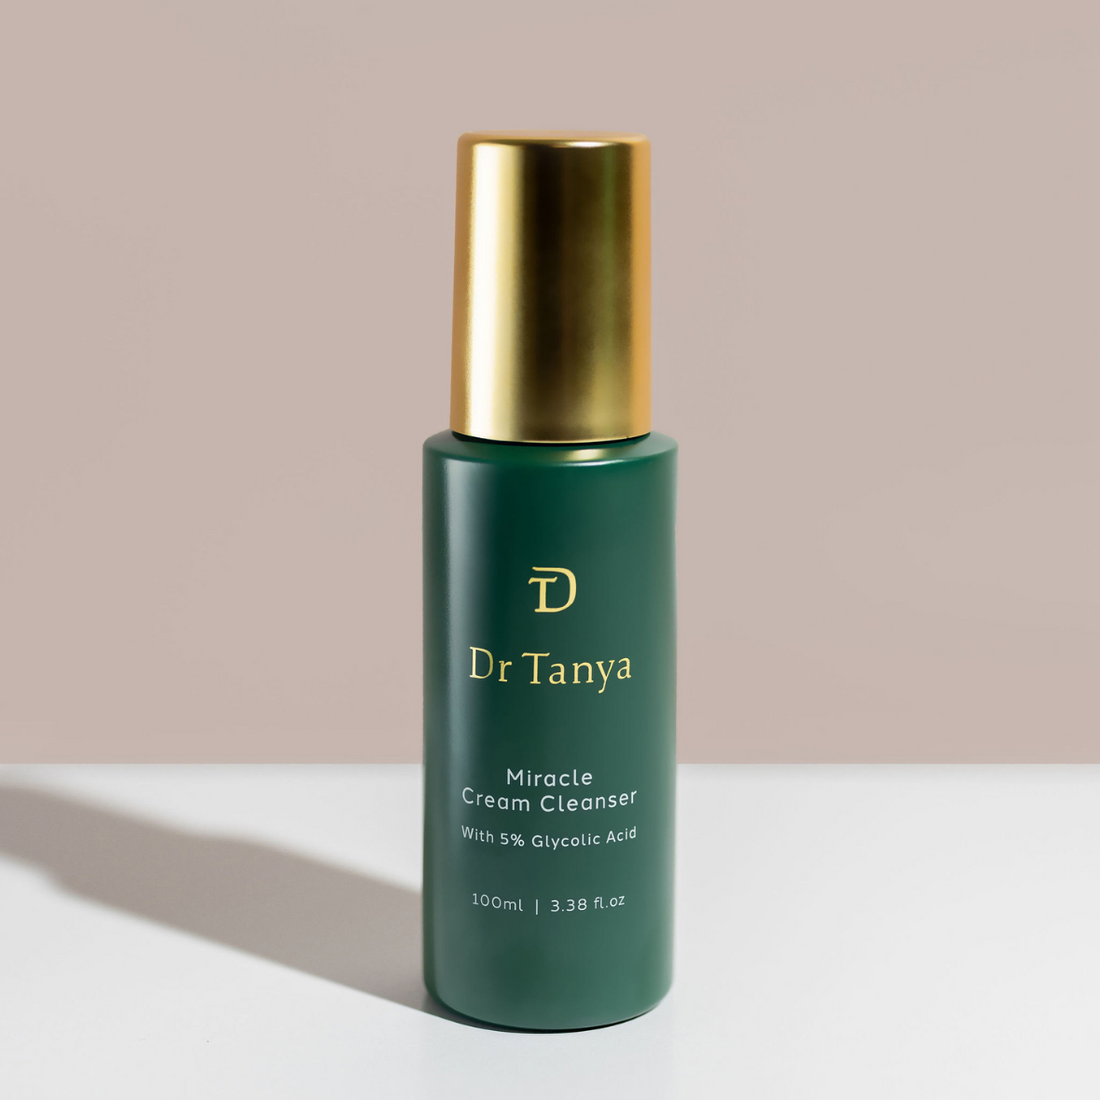 A green bottle of the Dr Tanya face cleanser